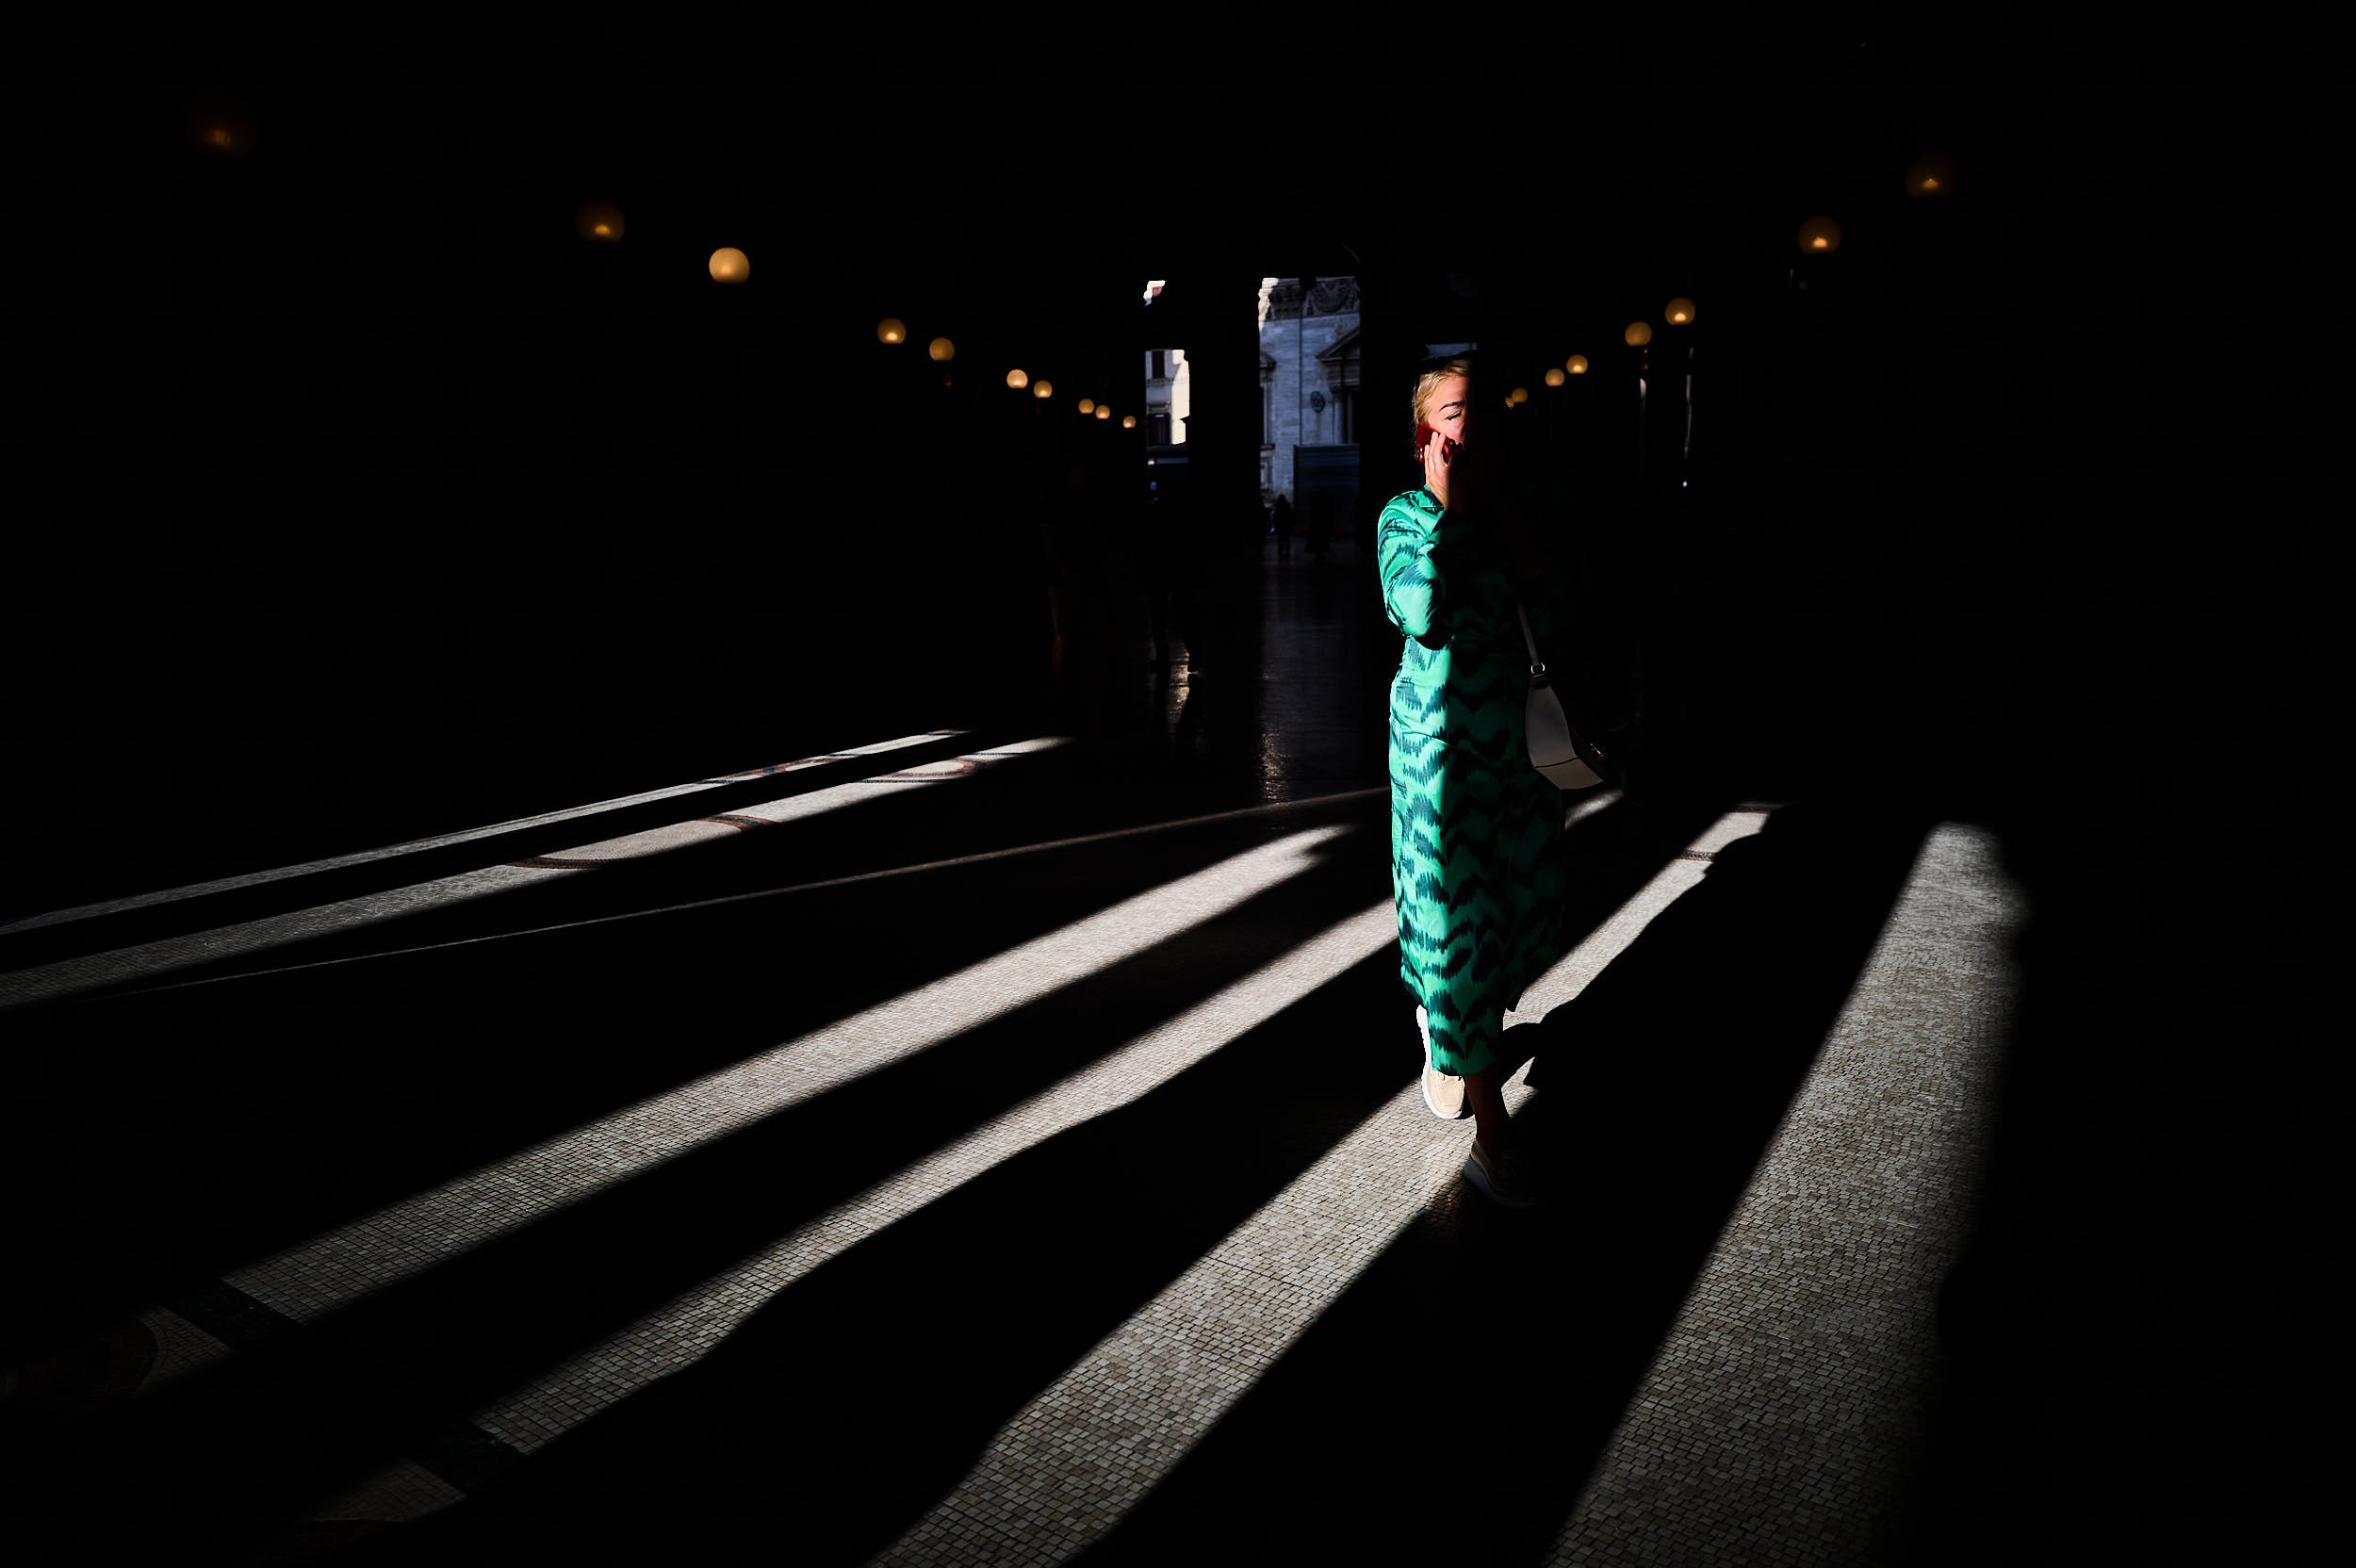 A woman wearing a green dressing walking between deep shadows and harsh light while making a call with her phone